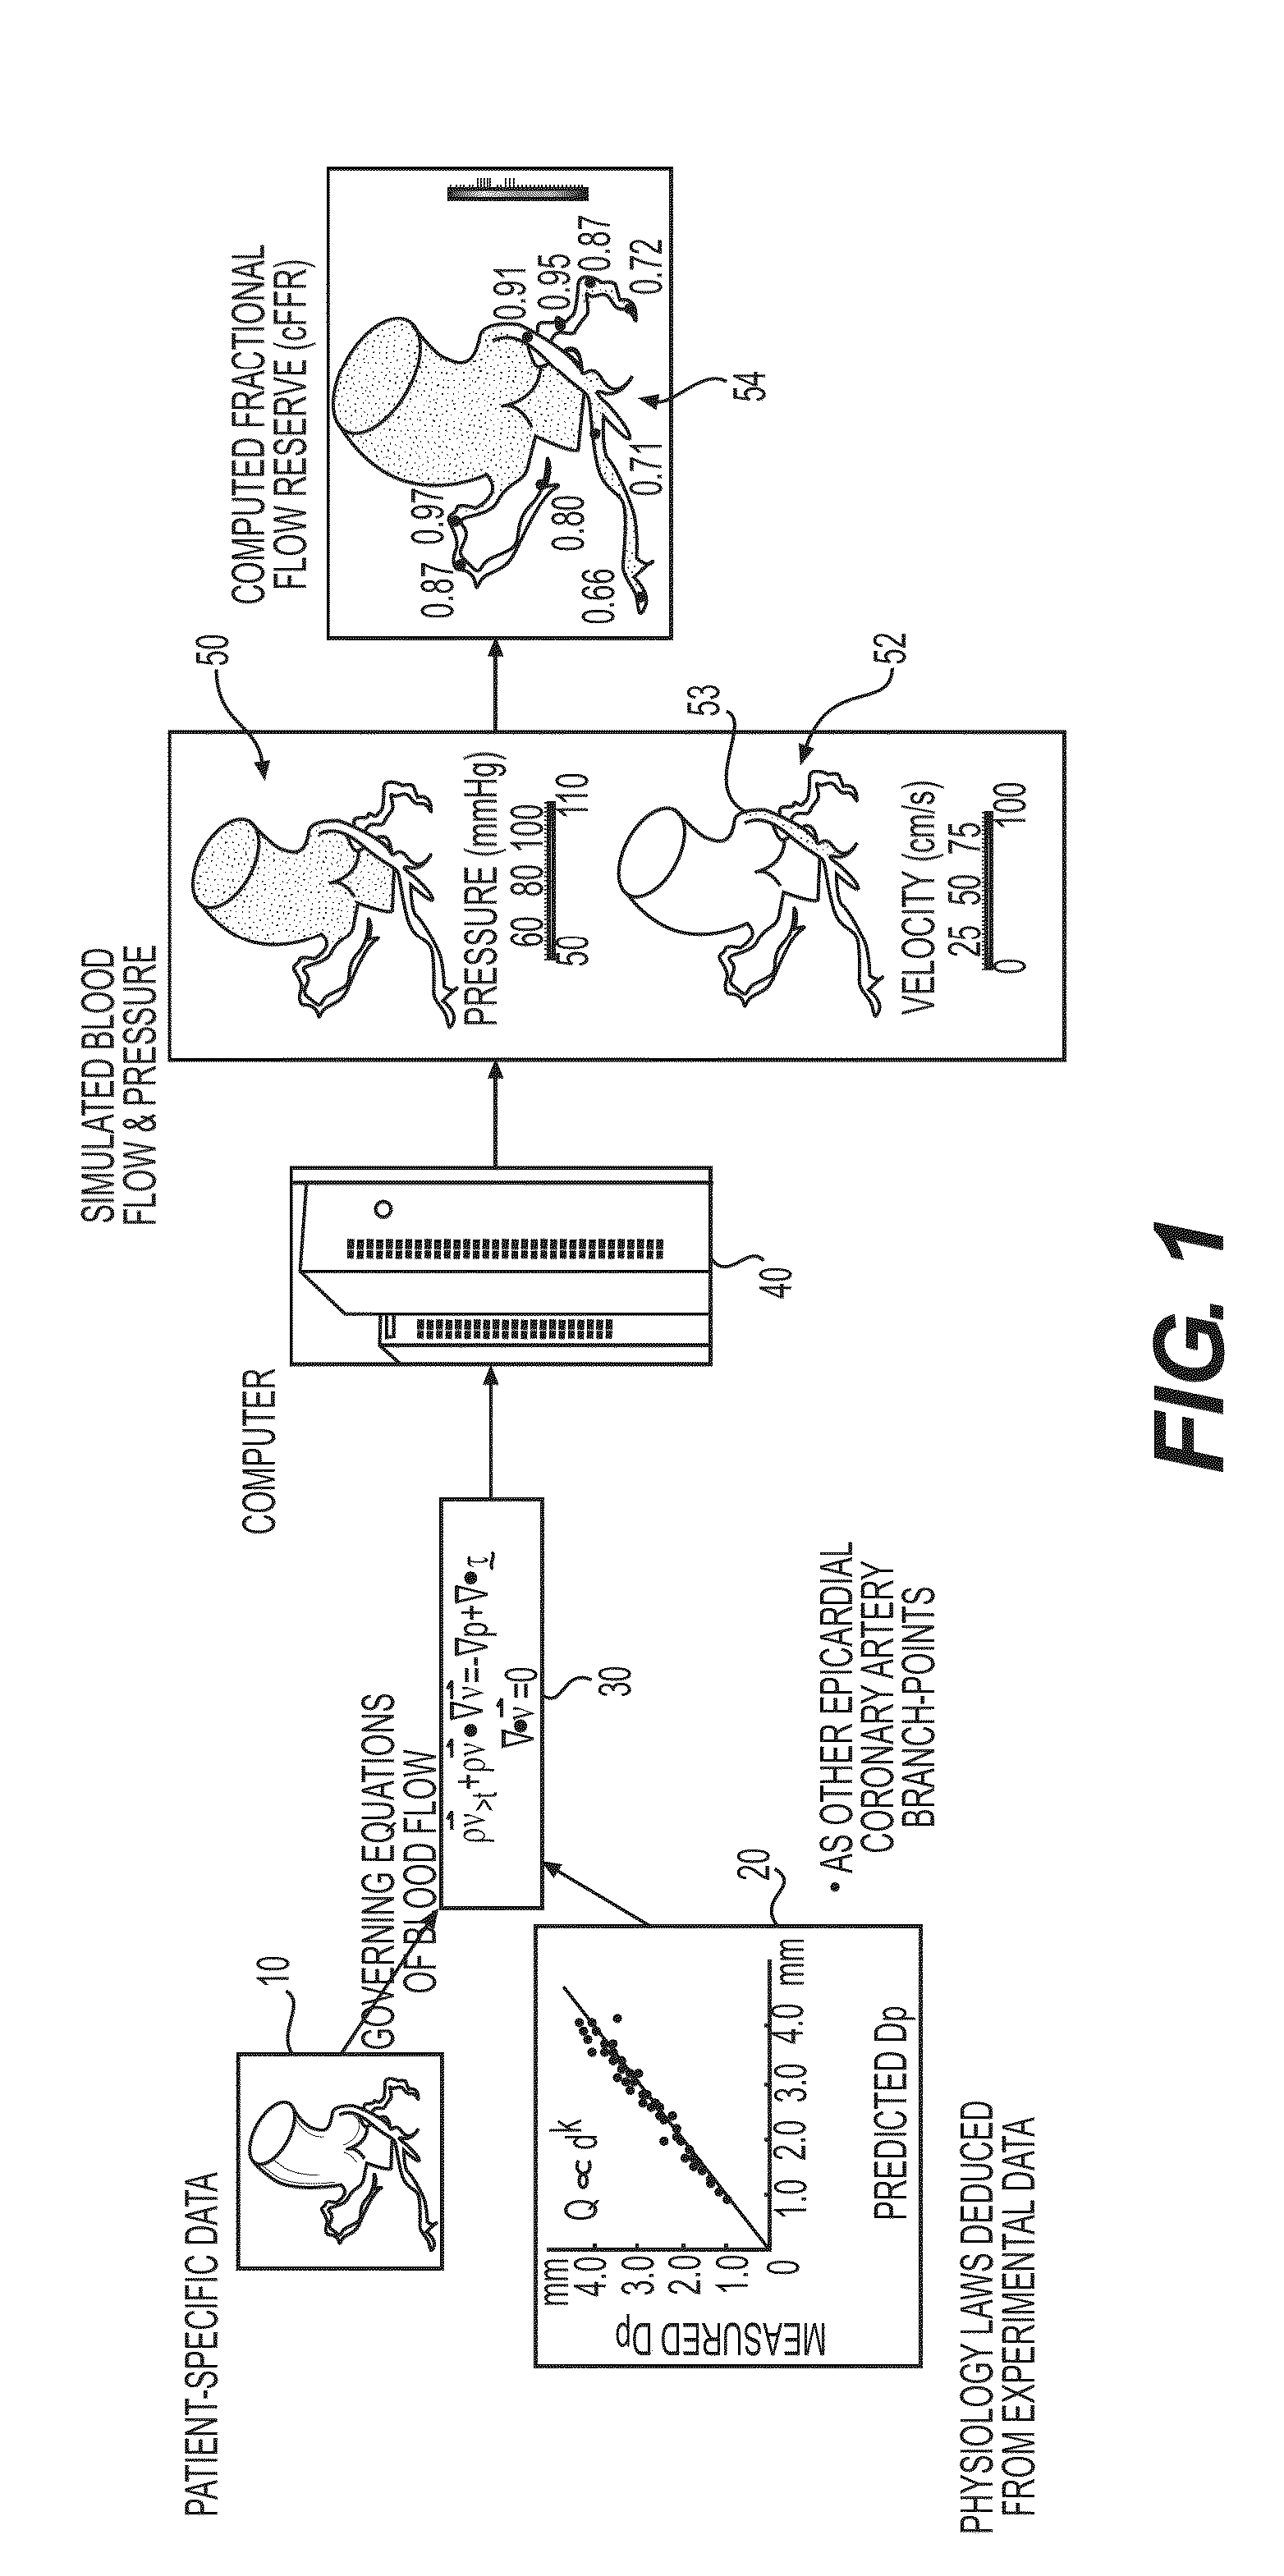 Method and system for image processing to determine patient-specific blood flow characteristics